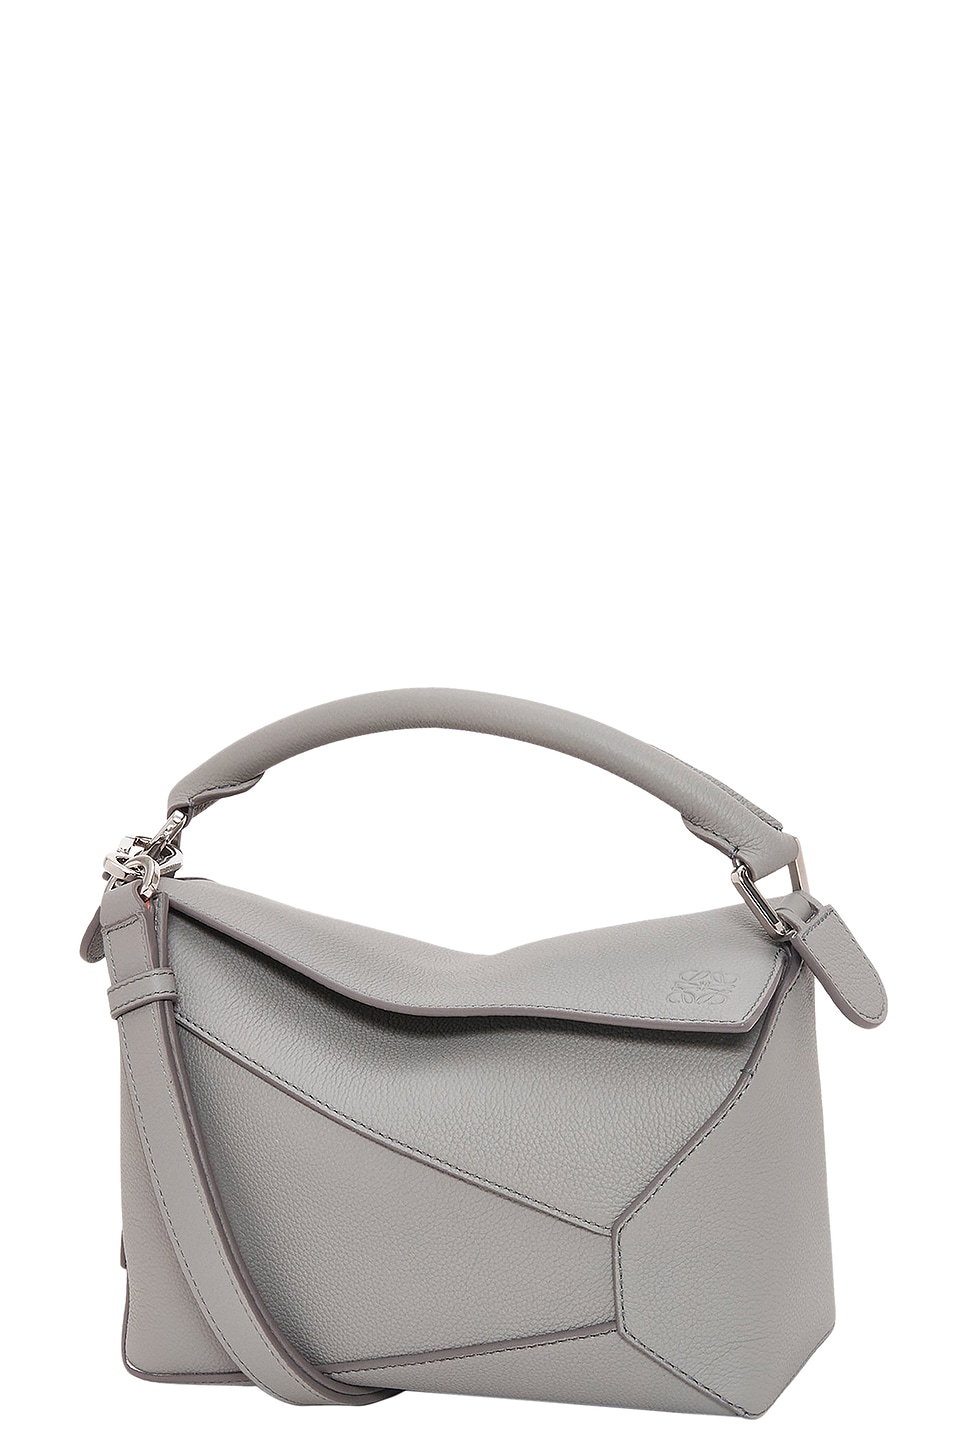 Loewe Small Puzzle Bag in Light Grey